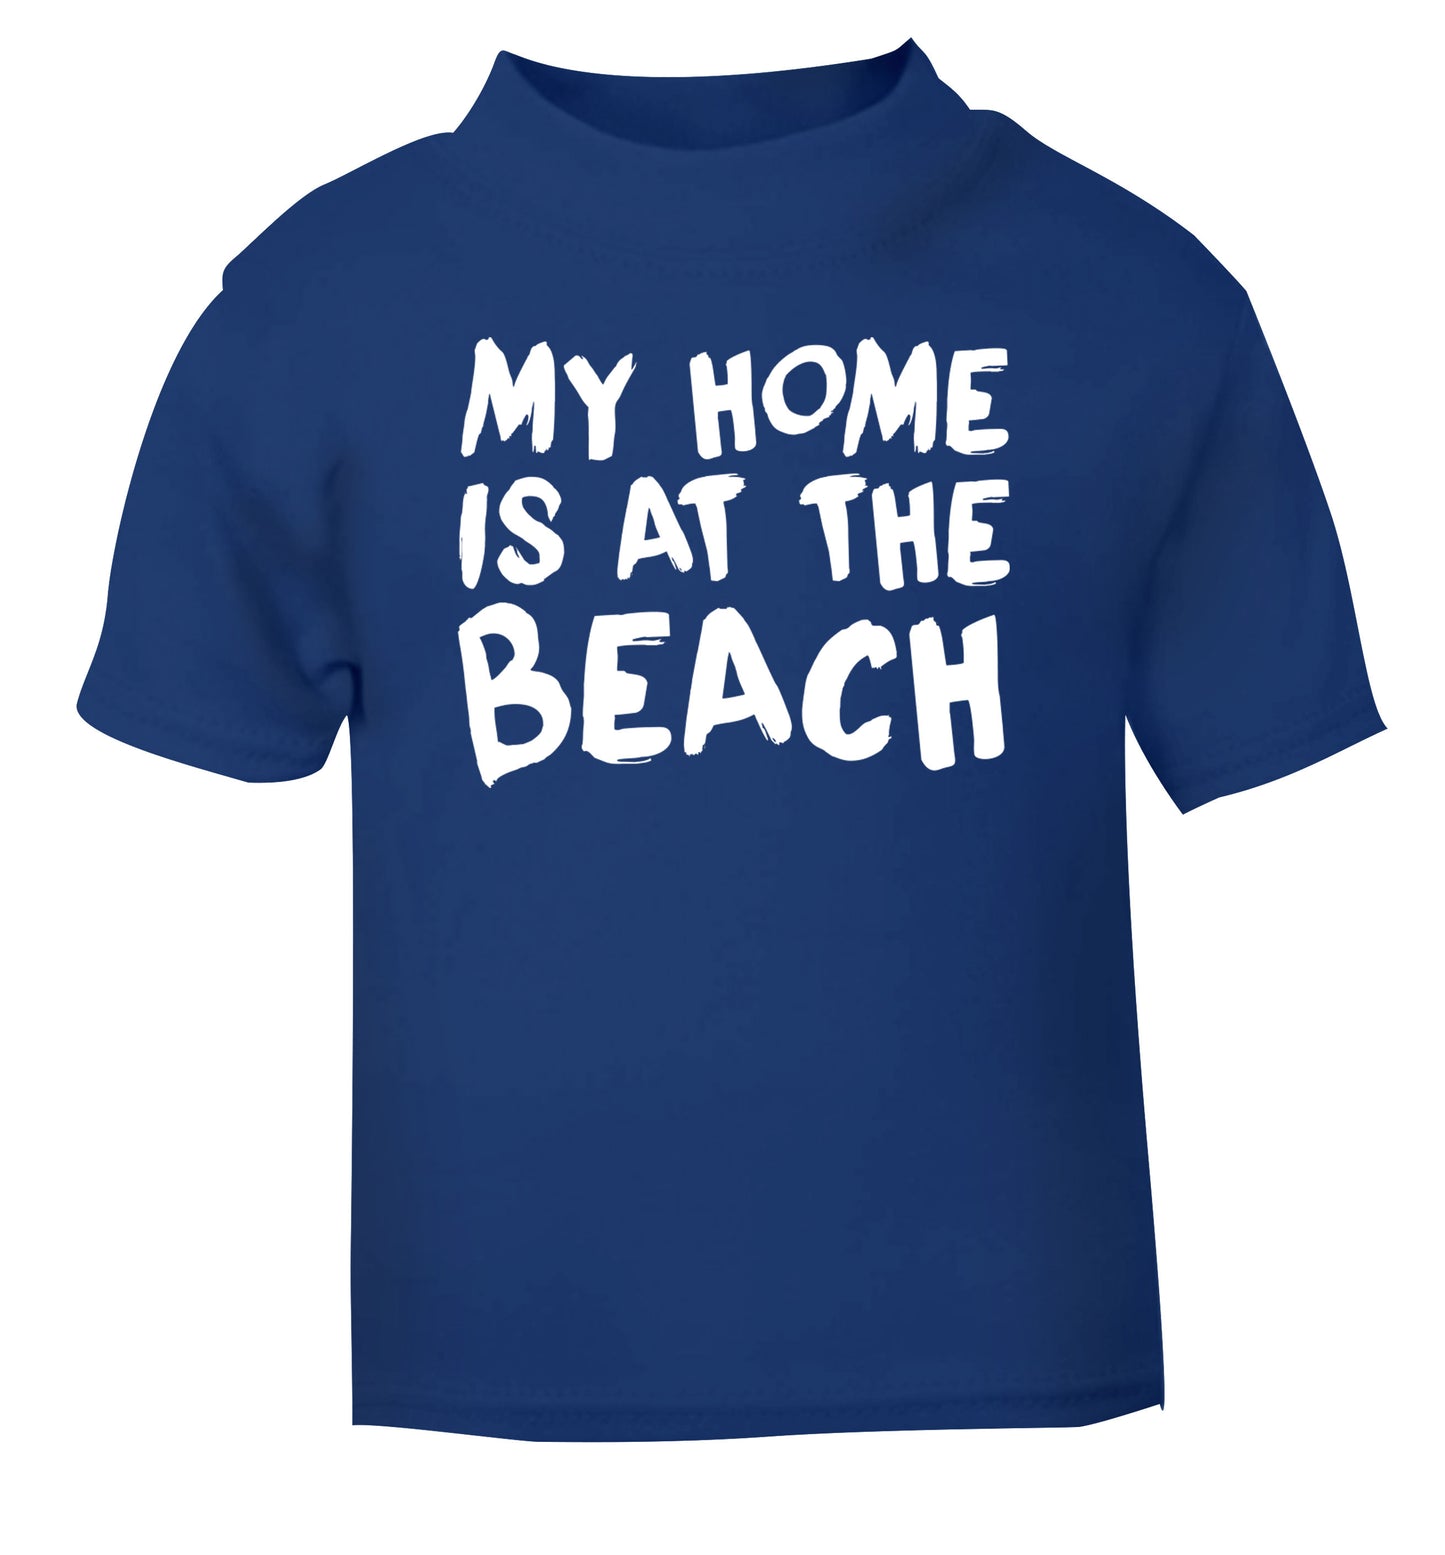 My home is at the beach blue Baby Toddler Tshirt 2 Years